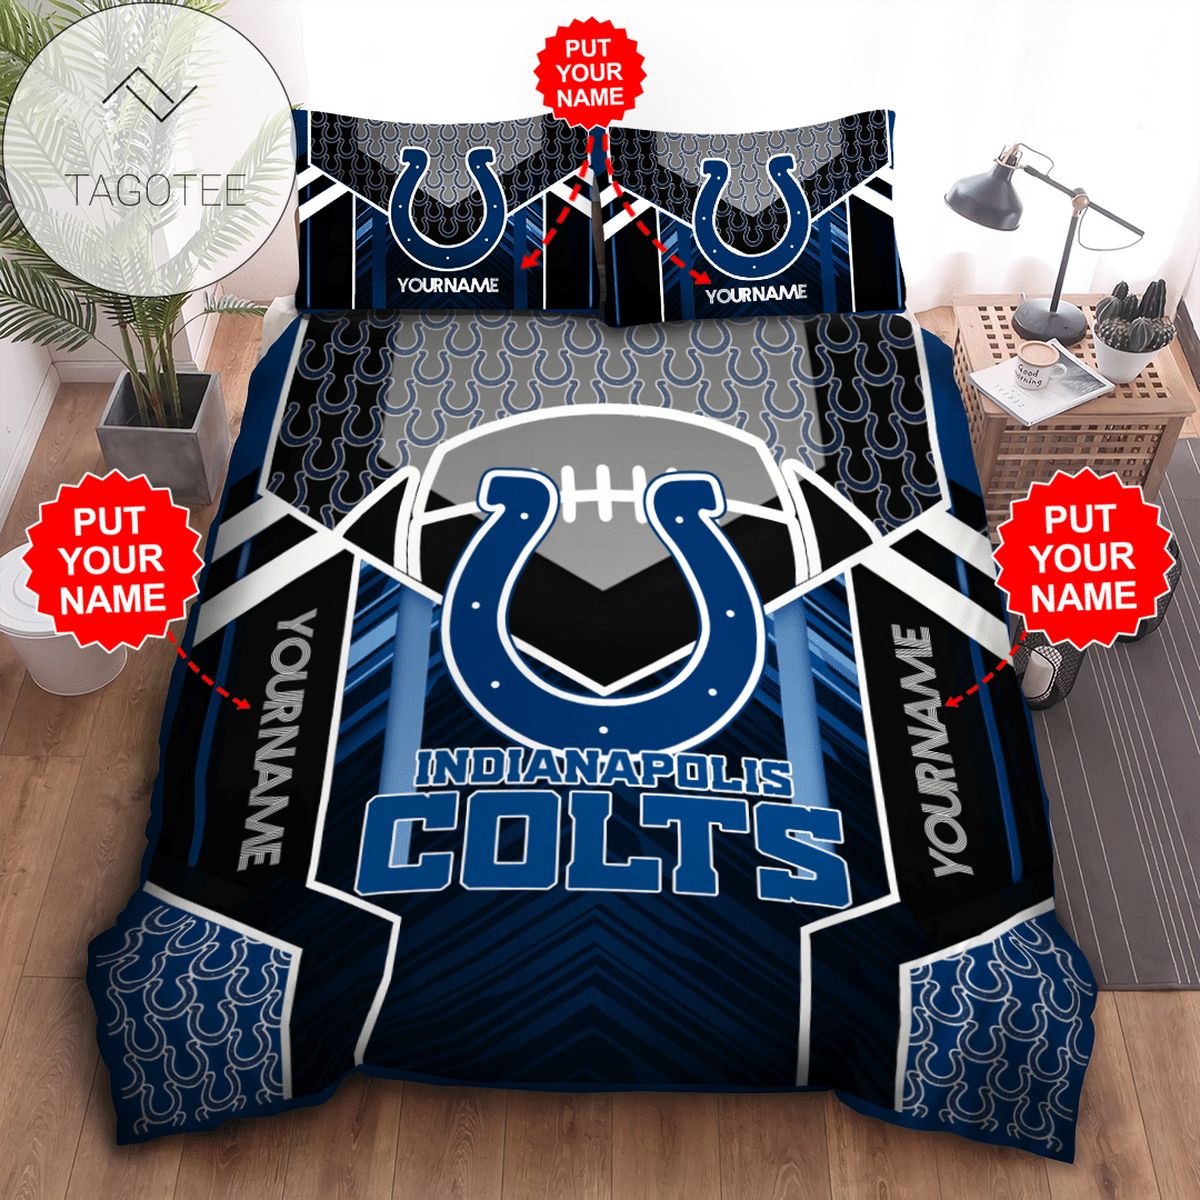 Personalized Indianapolis Colts Bedding Sets Duvet Cover Luxury Brand Bedroom Sets IC1 2022